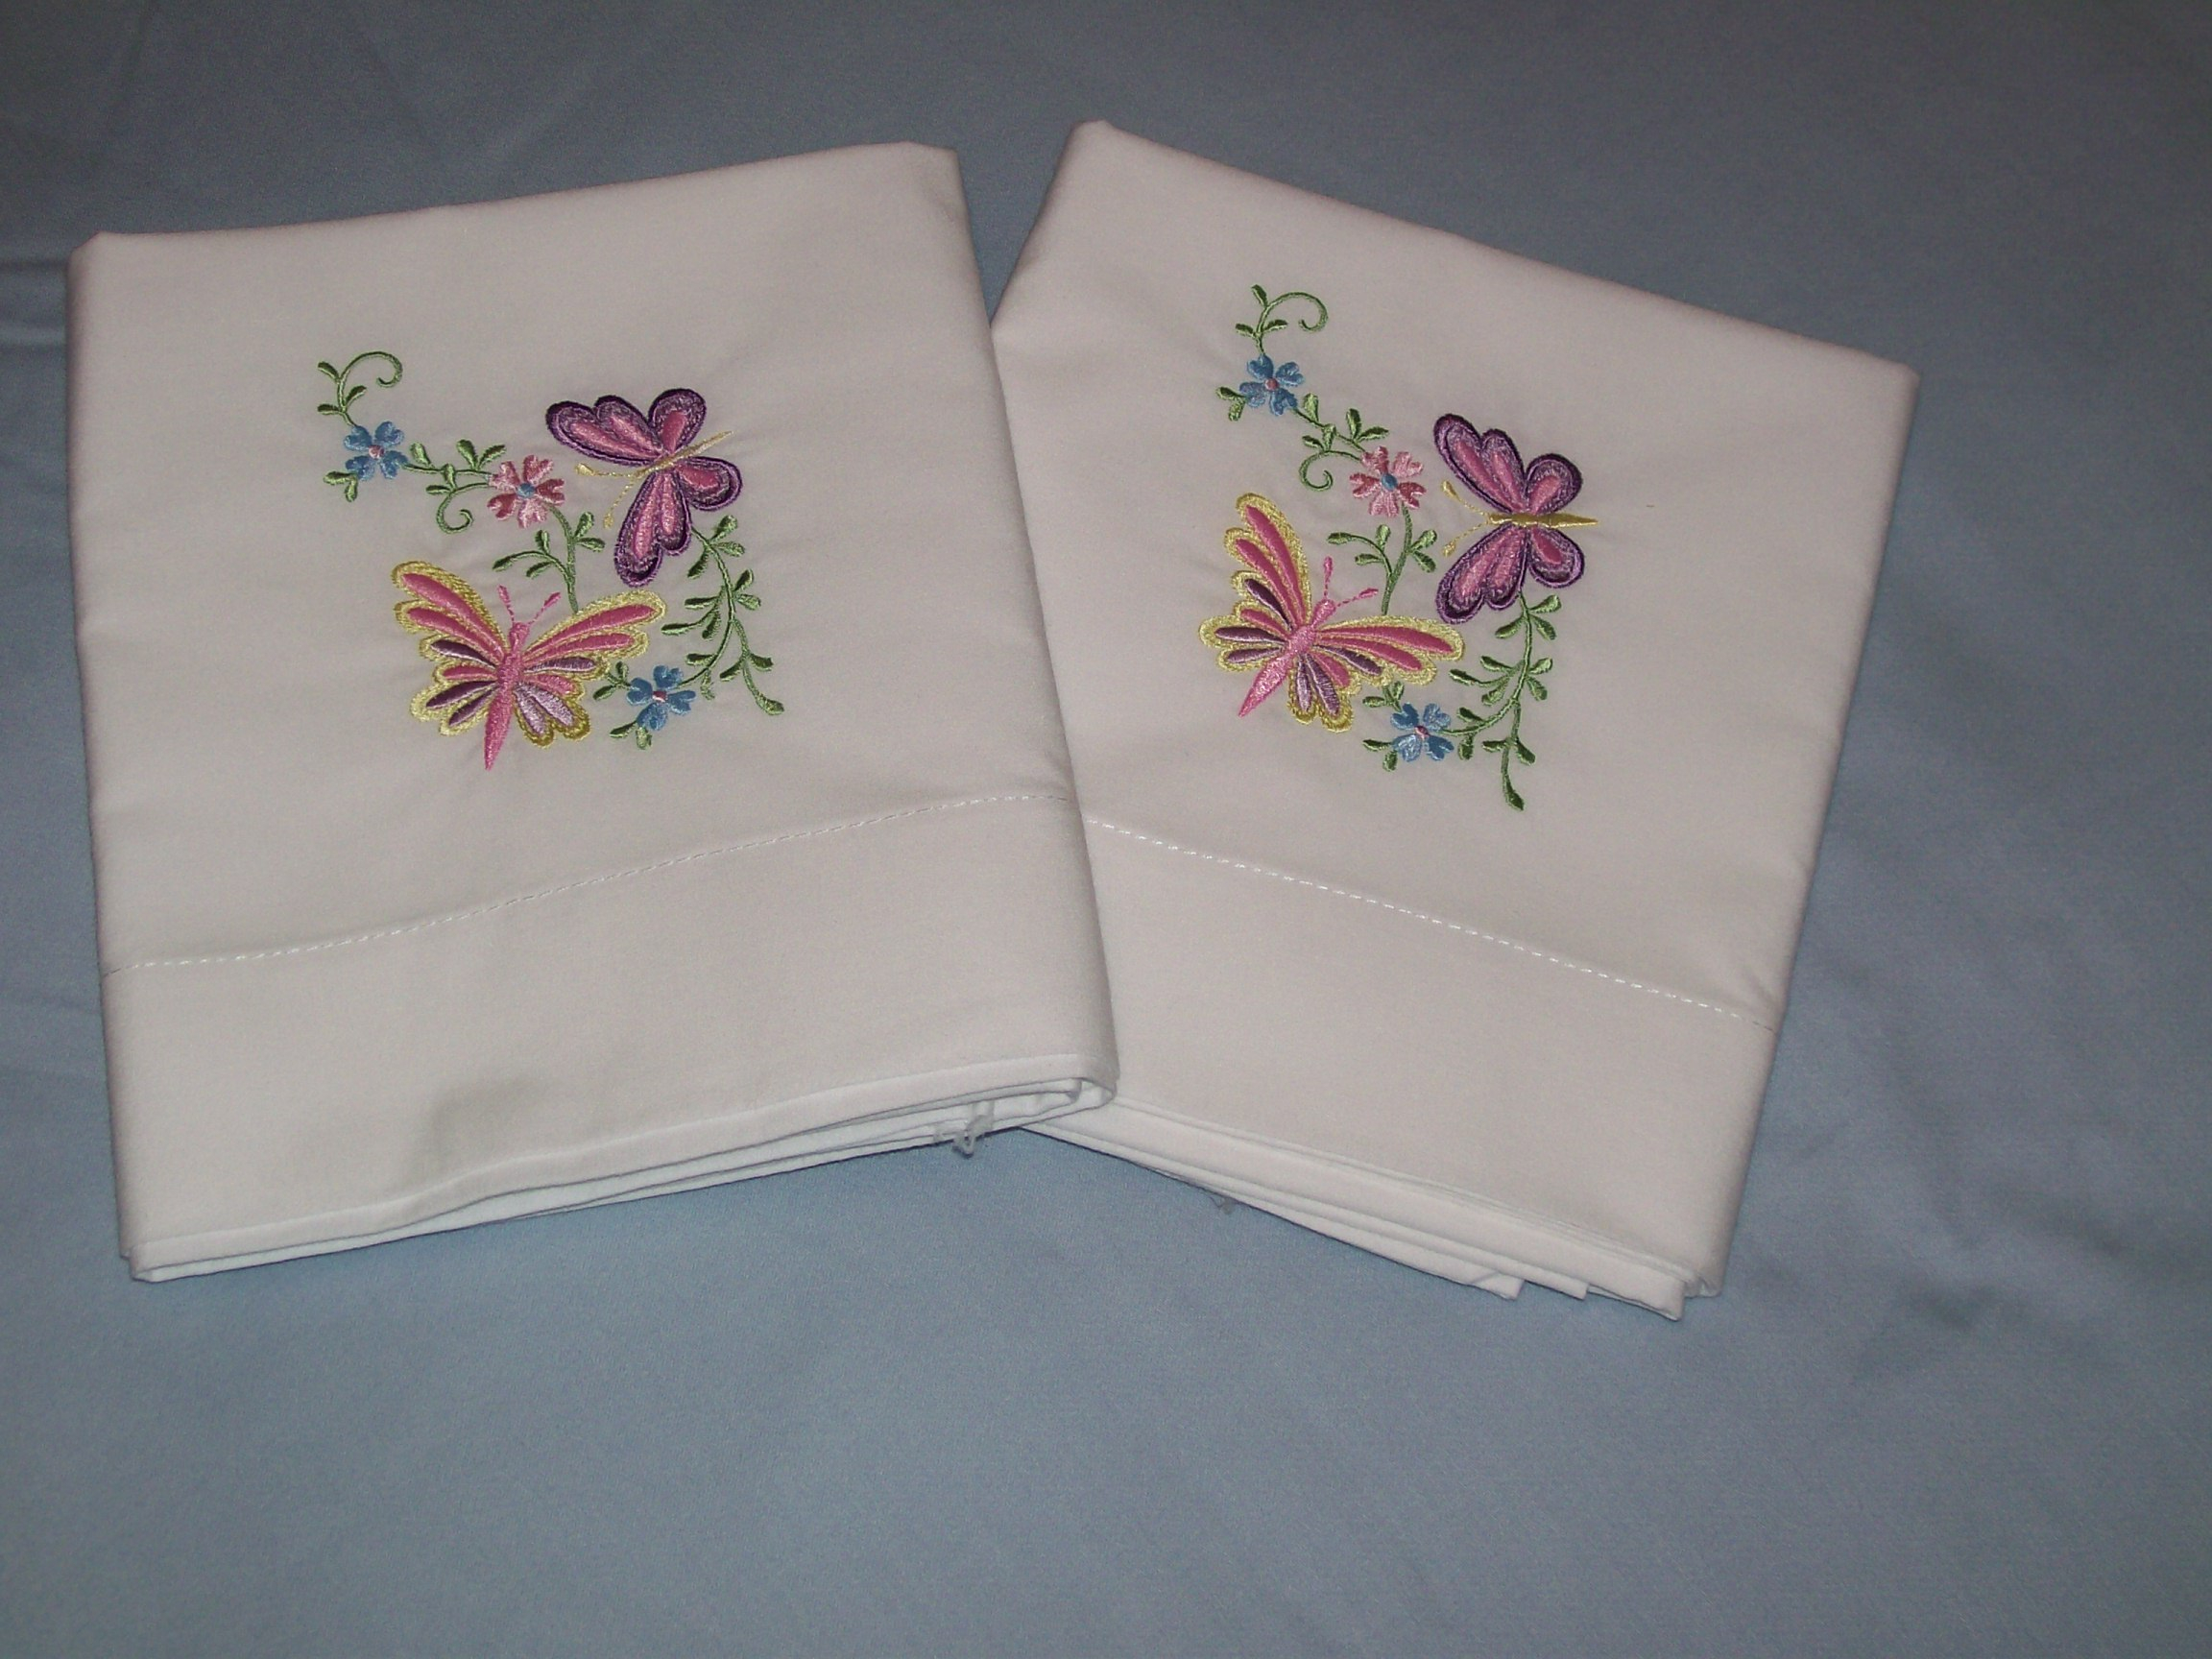 Hand Embroidery Patterns For Pillowcases Free Embroidery Designs Cute Embroidery Designs